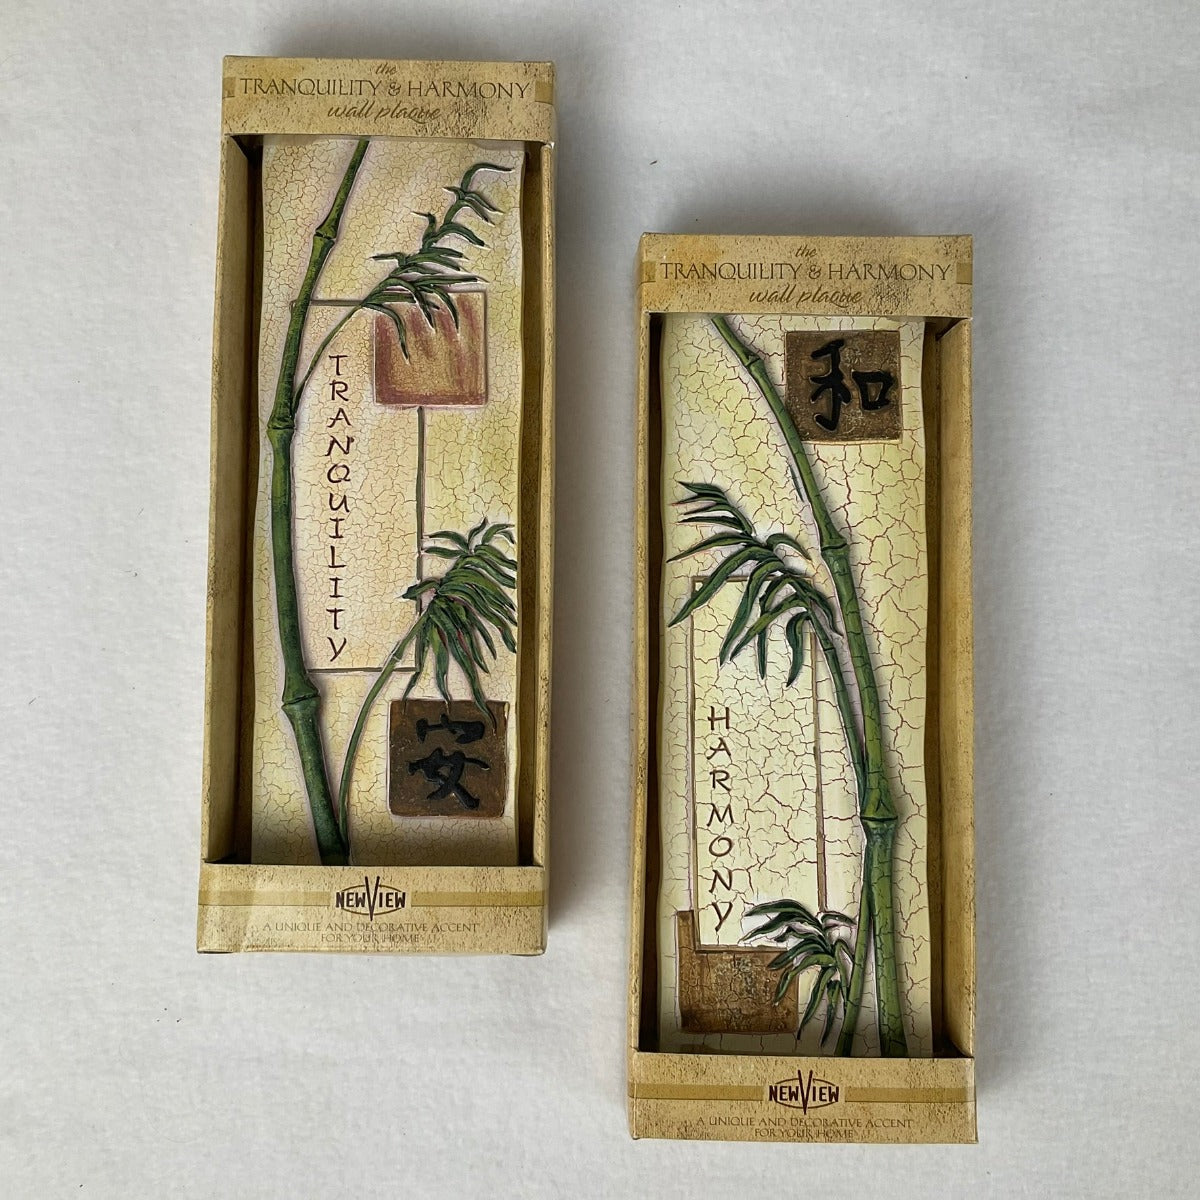 Tranquility and Harmony Asian Inspired Wall Plaques - Set of 2